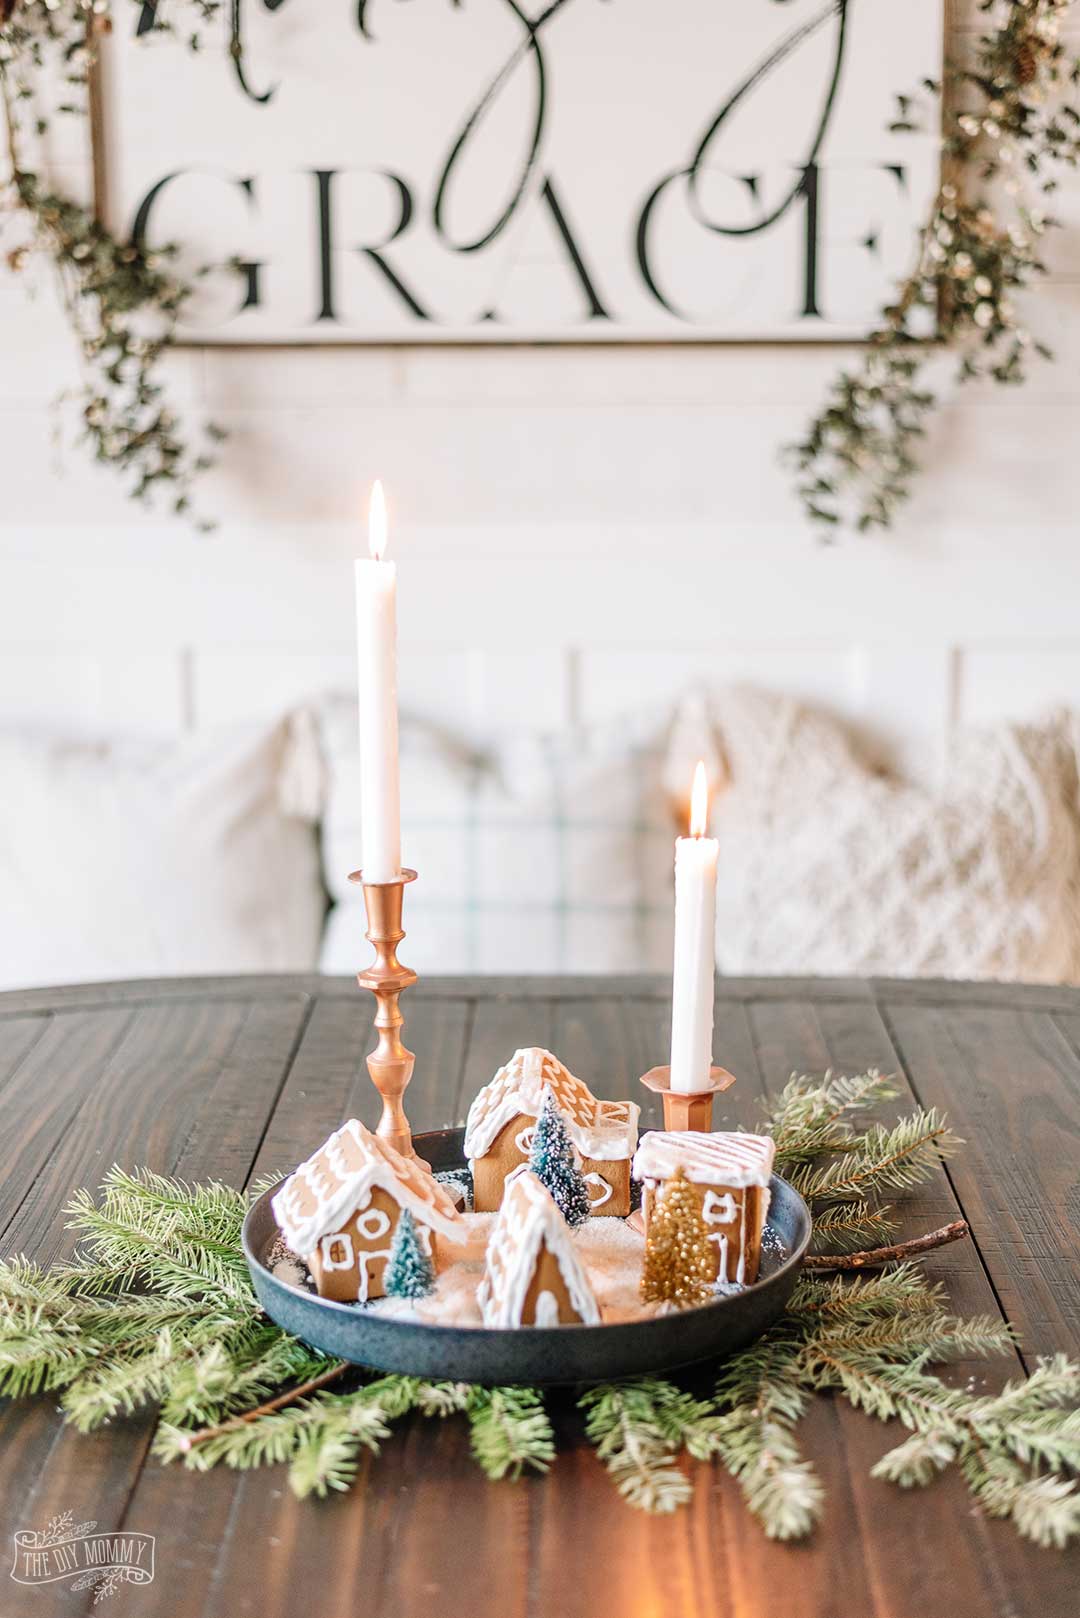 How to make the easiest tiny gingerbread Christmas centerpiece